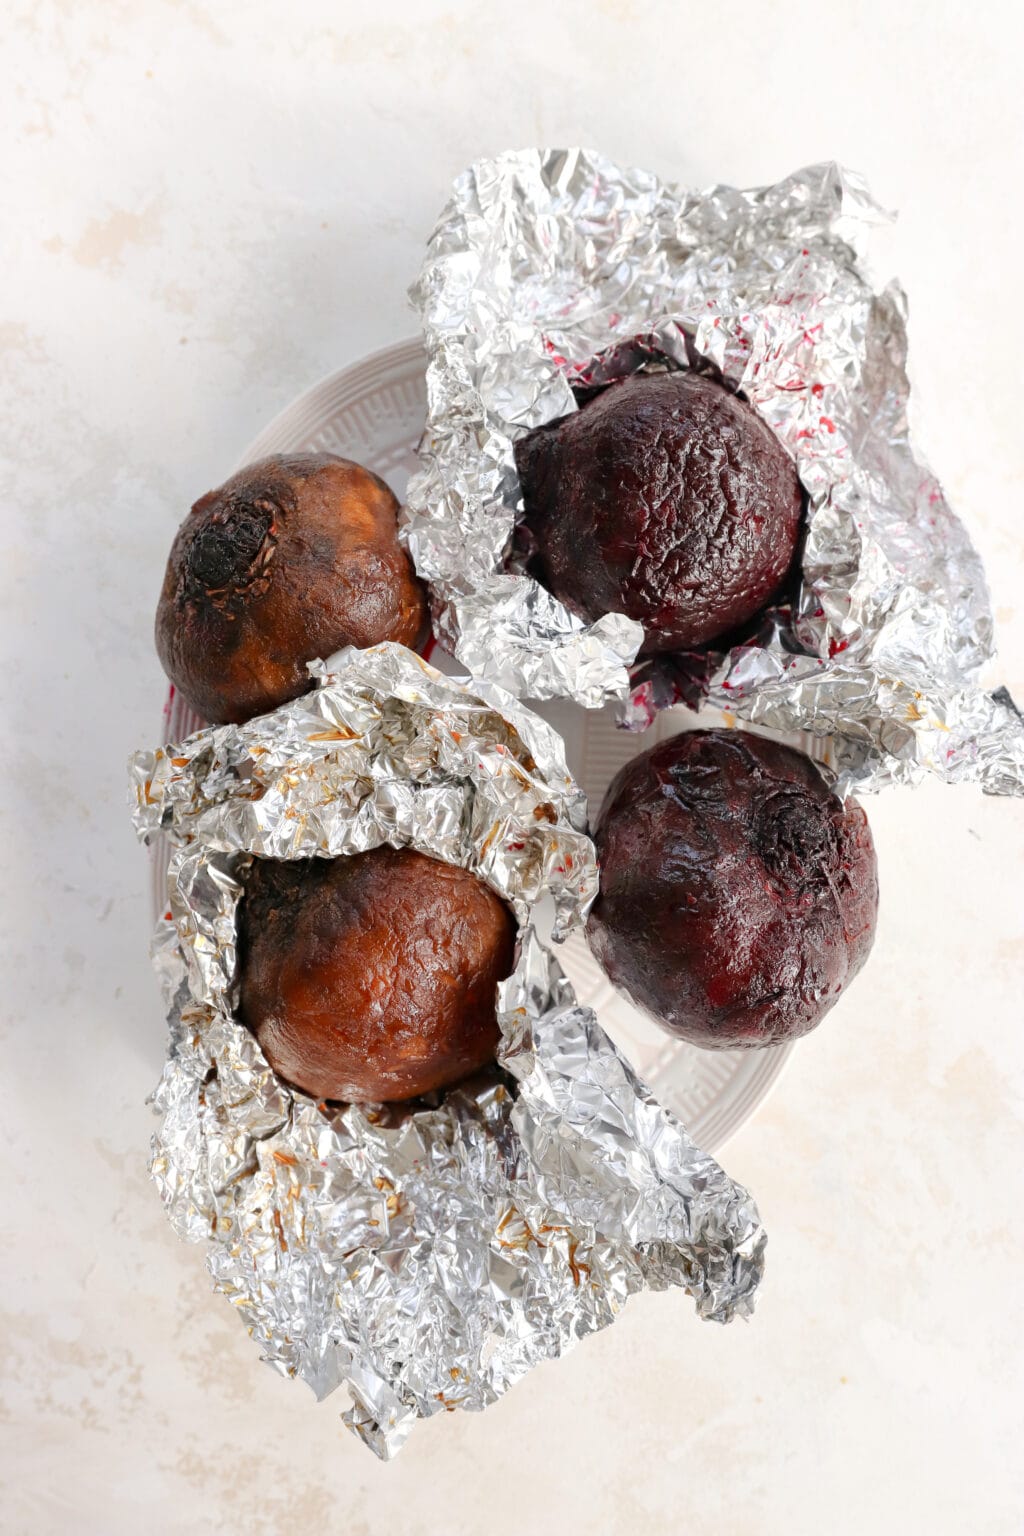 Four beets wrapped in foil for making blood orange roasted beet salad with creamy yogurt dressing